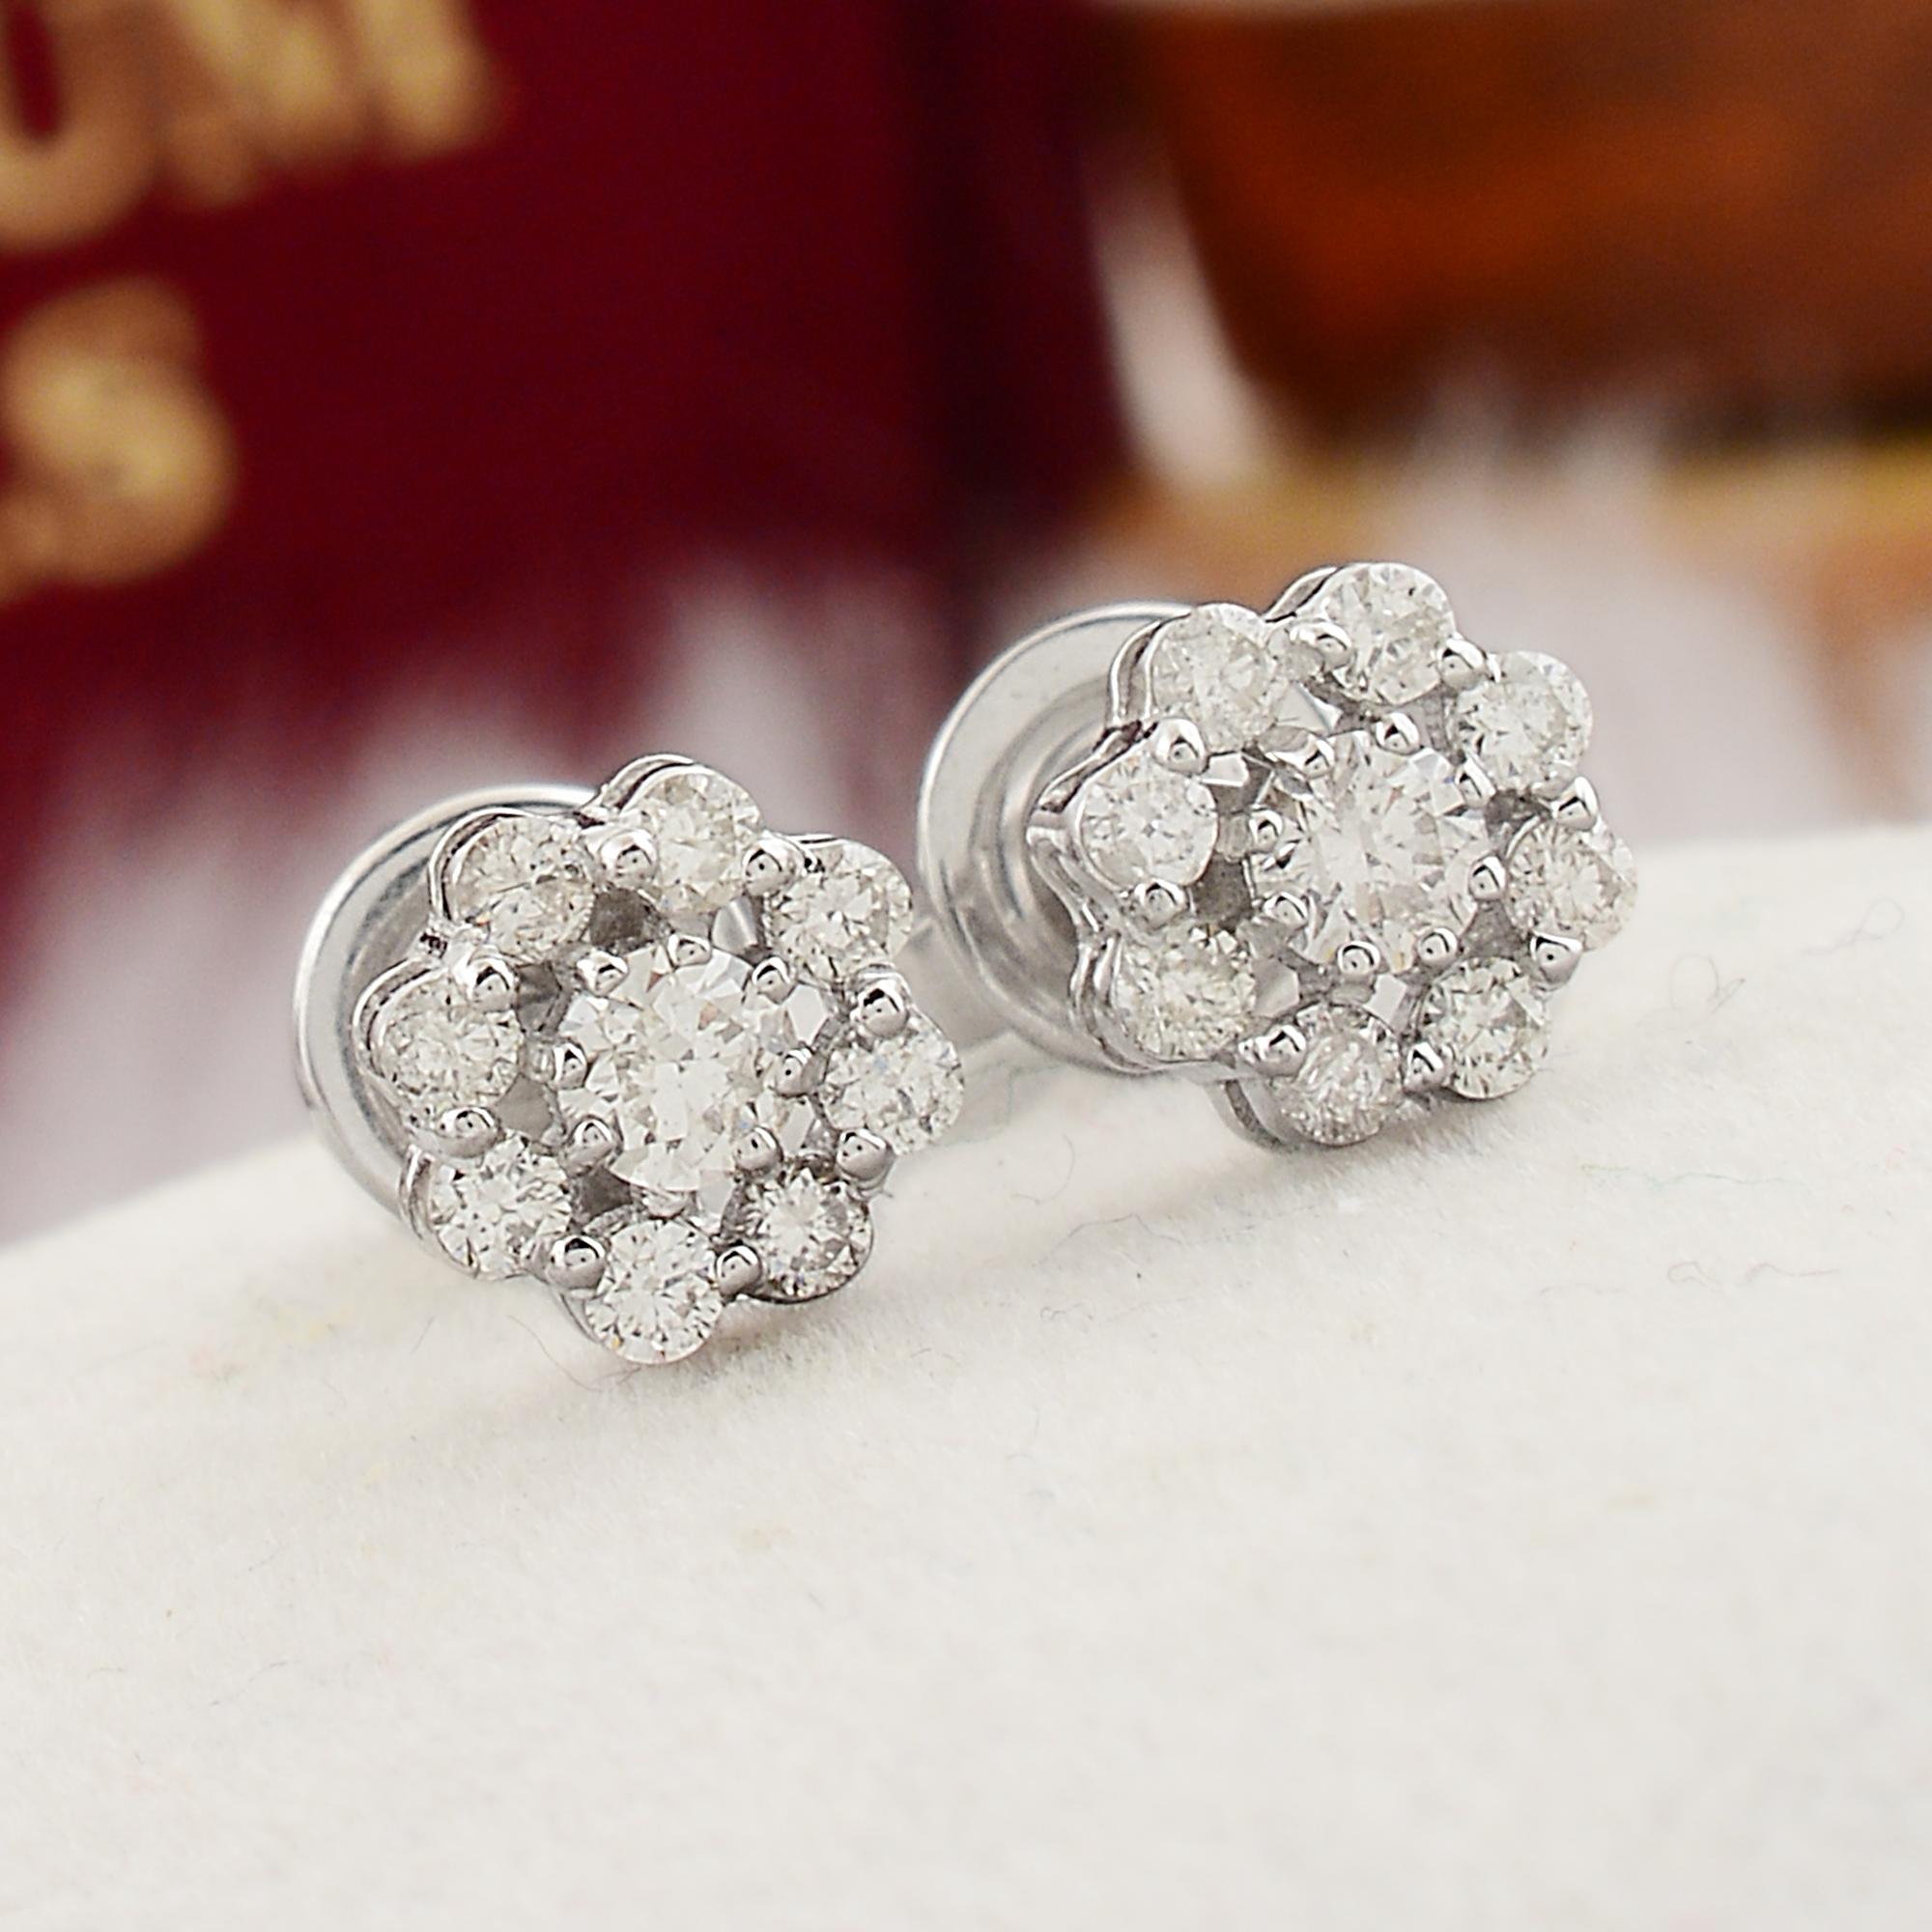 Elevate your style with these enchanting Natural 0.36 Ct SI/HI Pave Diamond Stud Flower Earrings, delicately crafted in lustrous 10 Karat White Gold. These exquisite earrings are a celebration of elegance and grace, destined to become a cherished